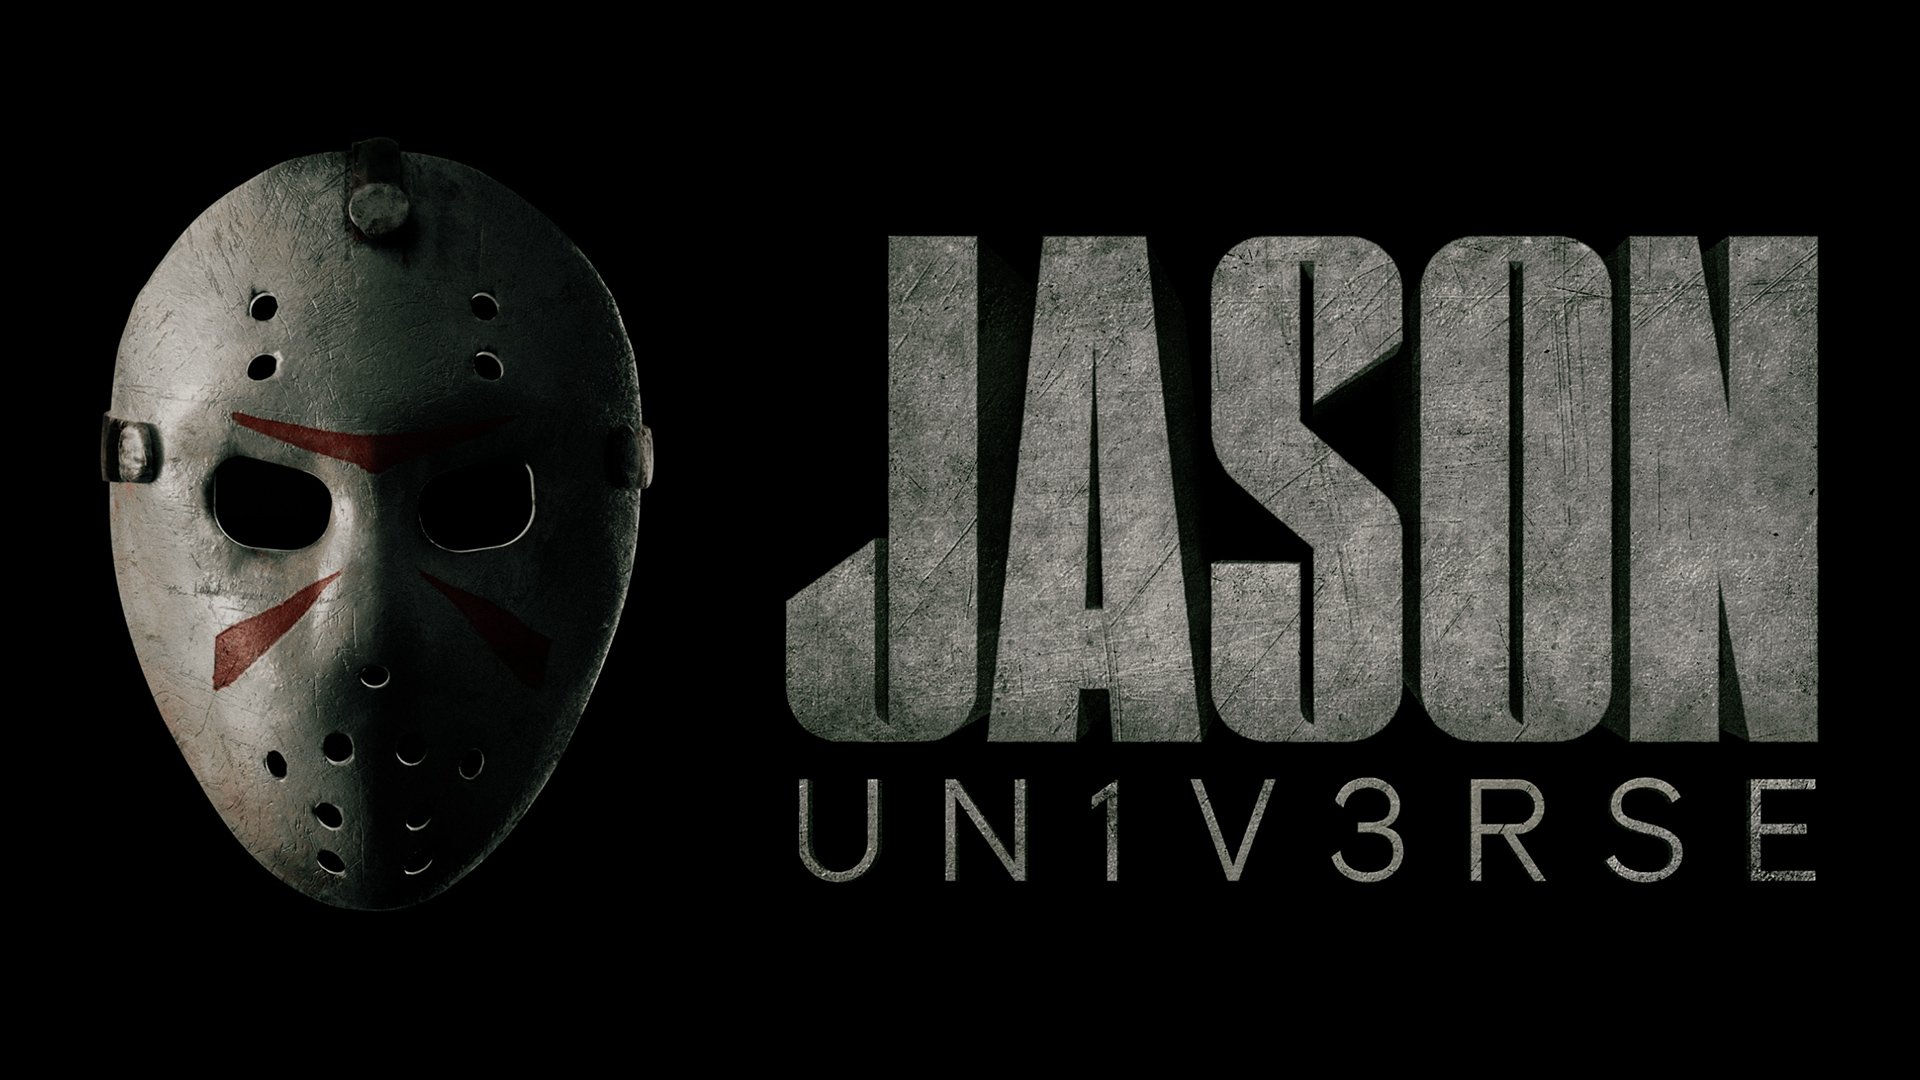 Friday the 13th villain Jason Voorhees is set to appear in more games